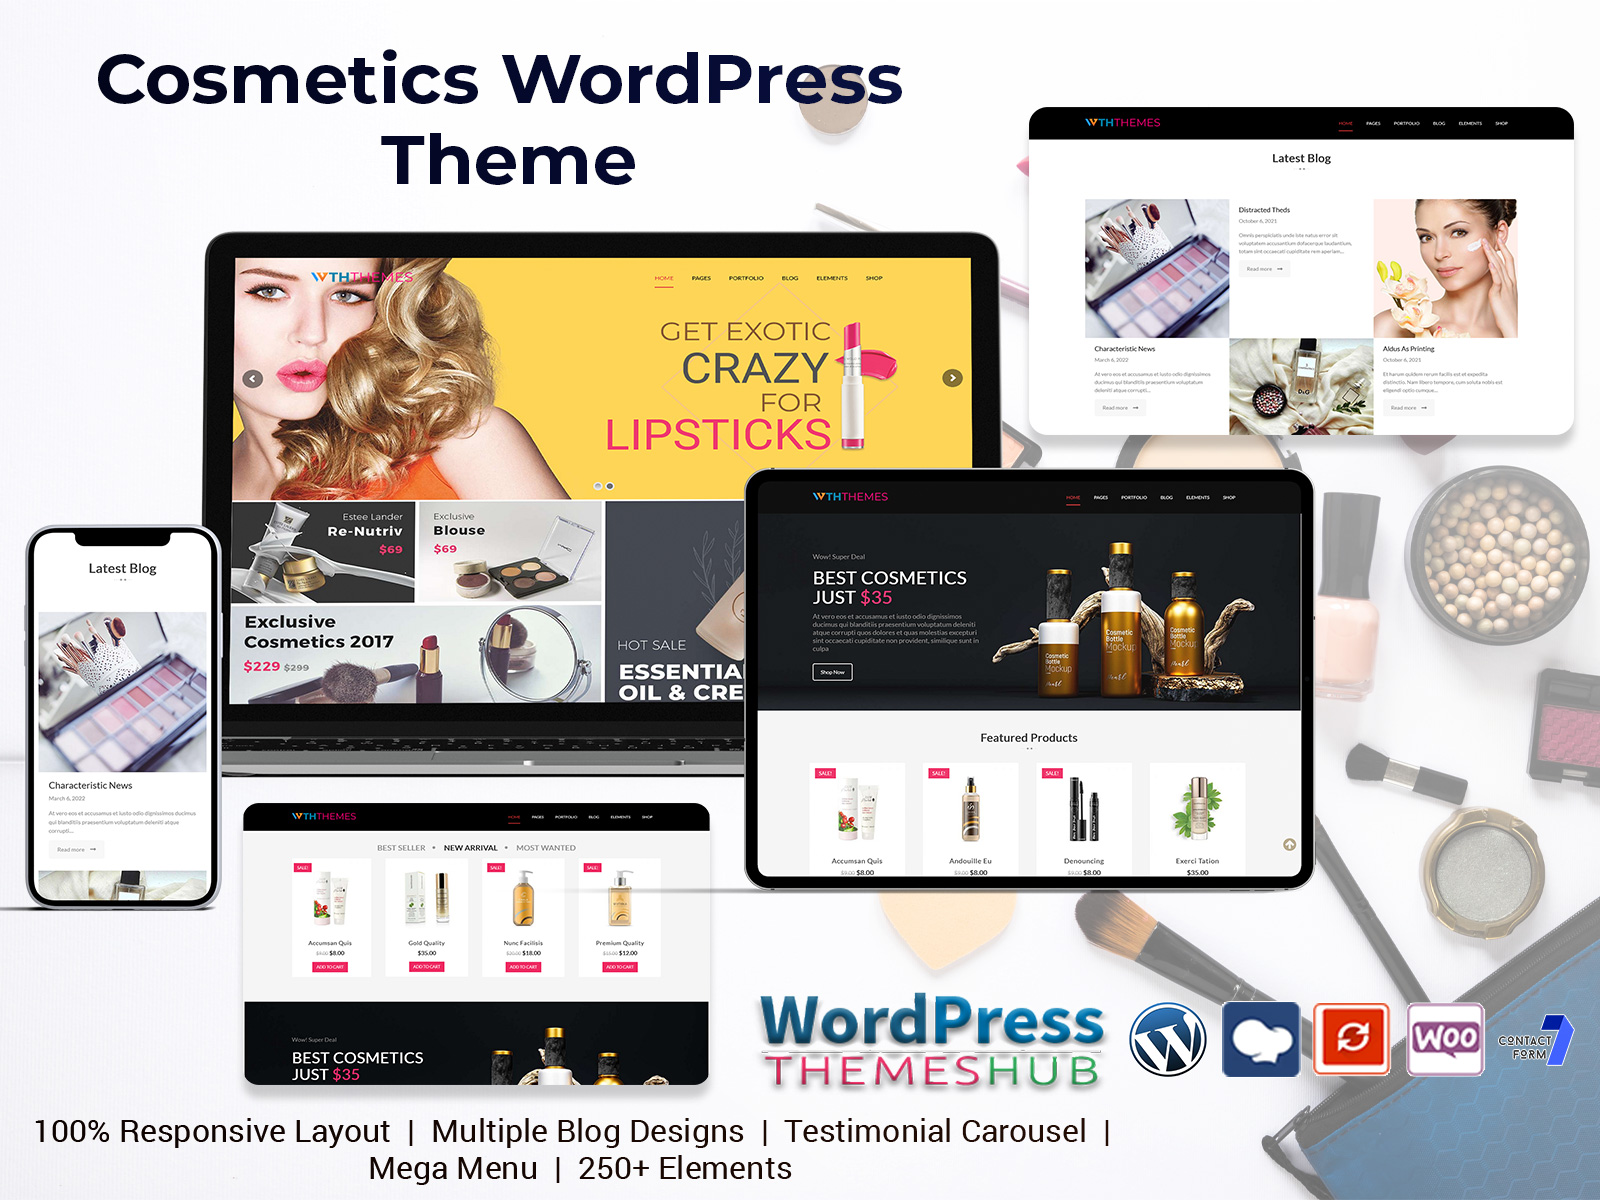 WordPress Theme for Online Stores That Sell Beauty And Cosmetic Products